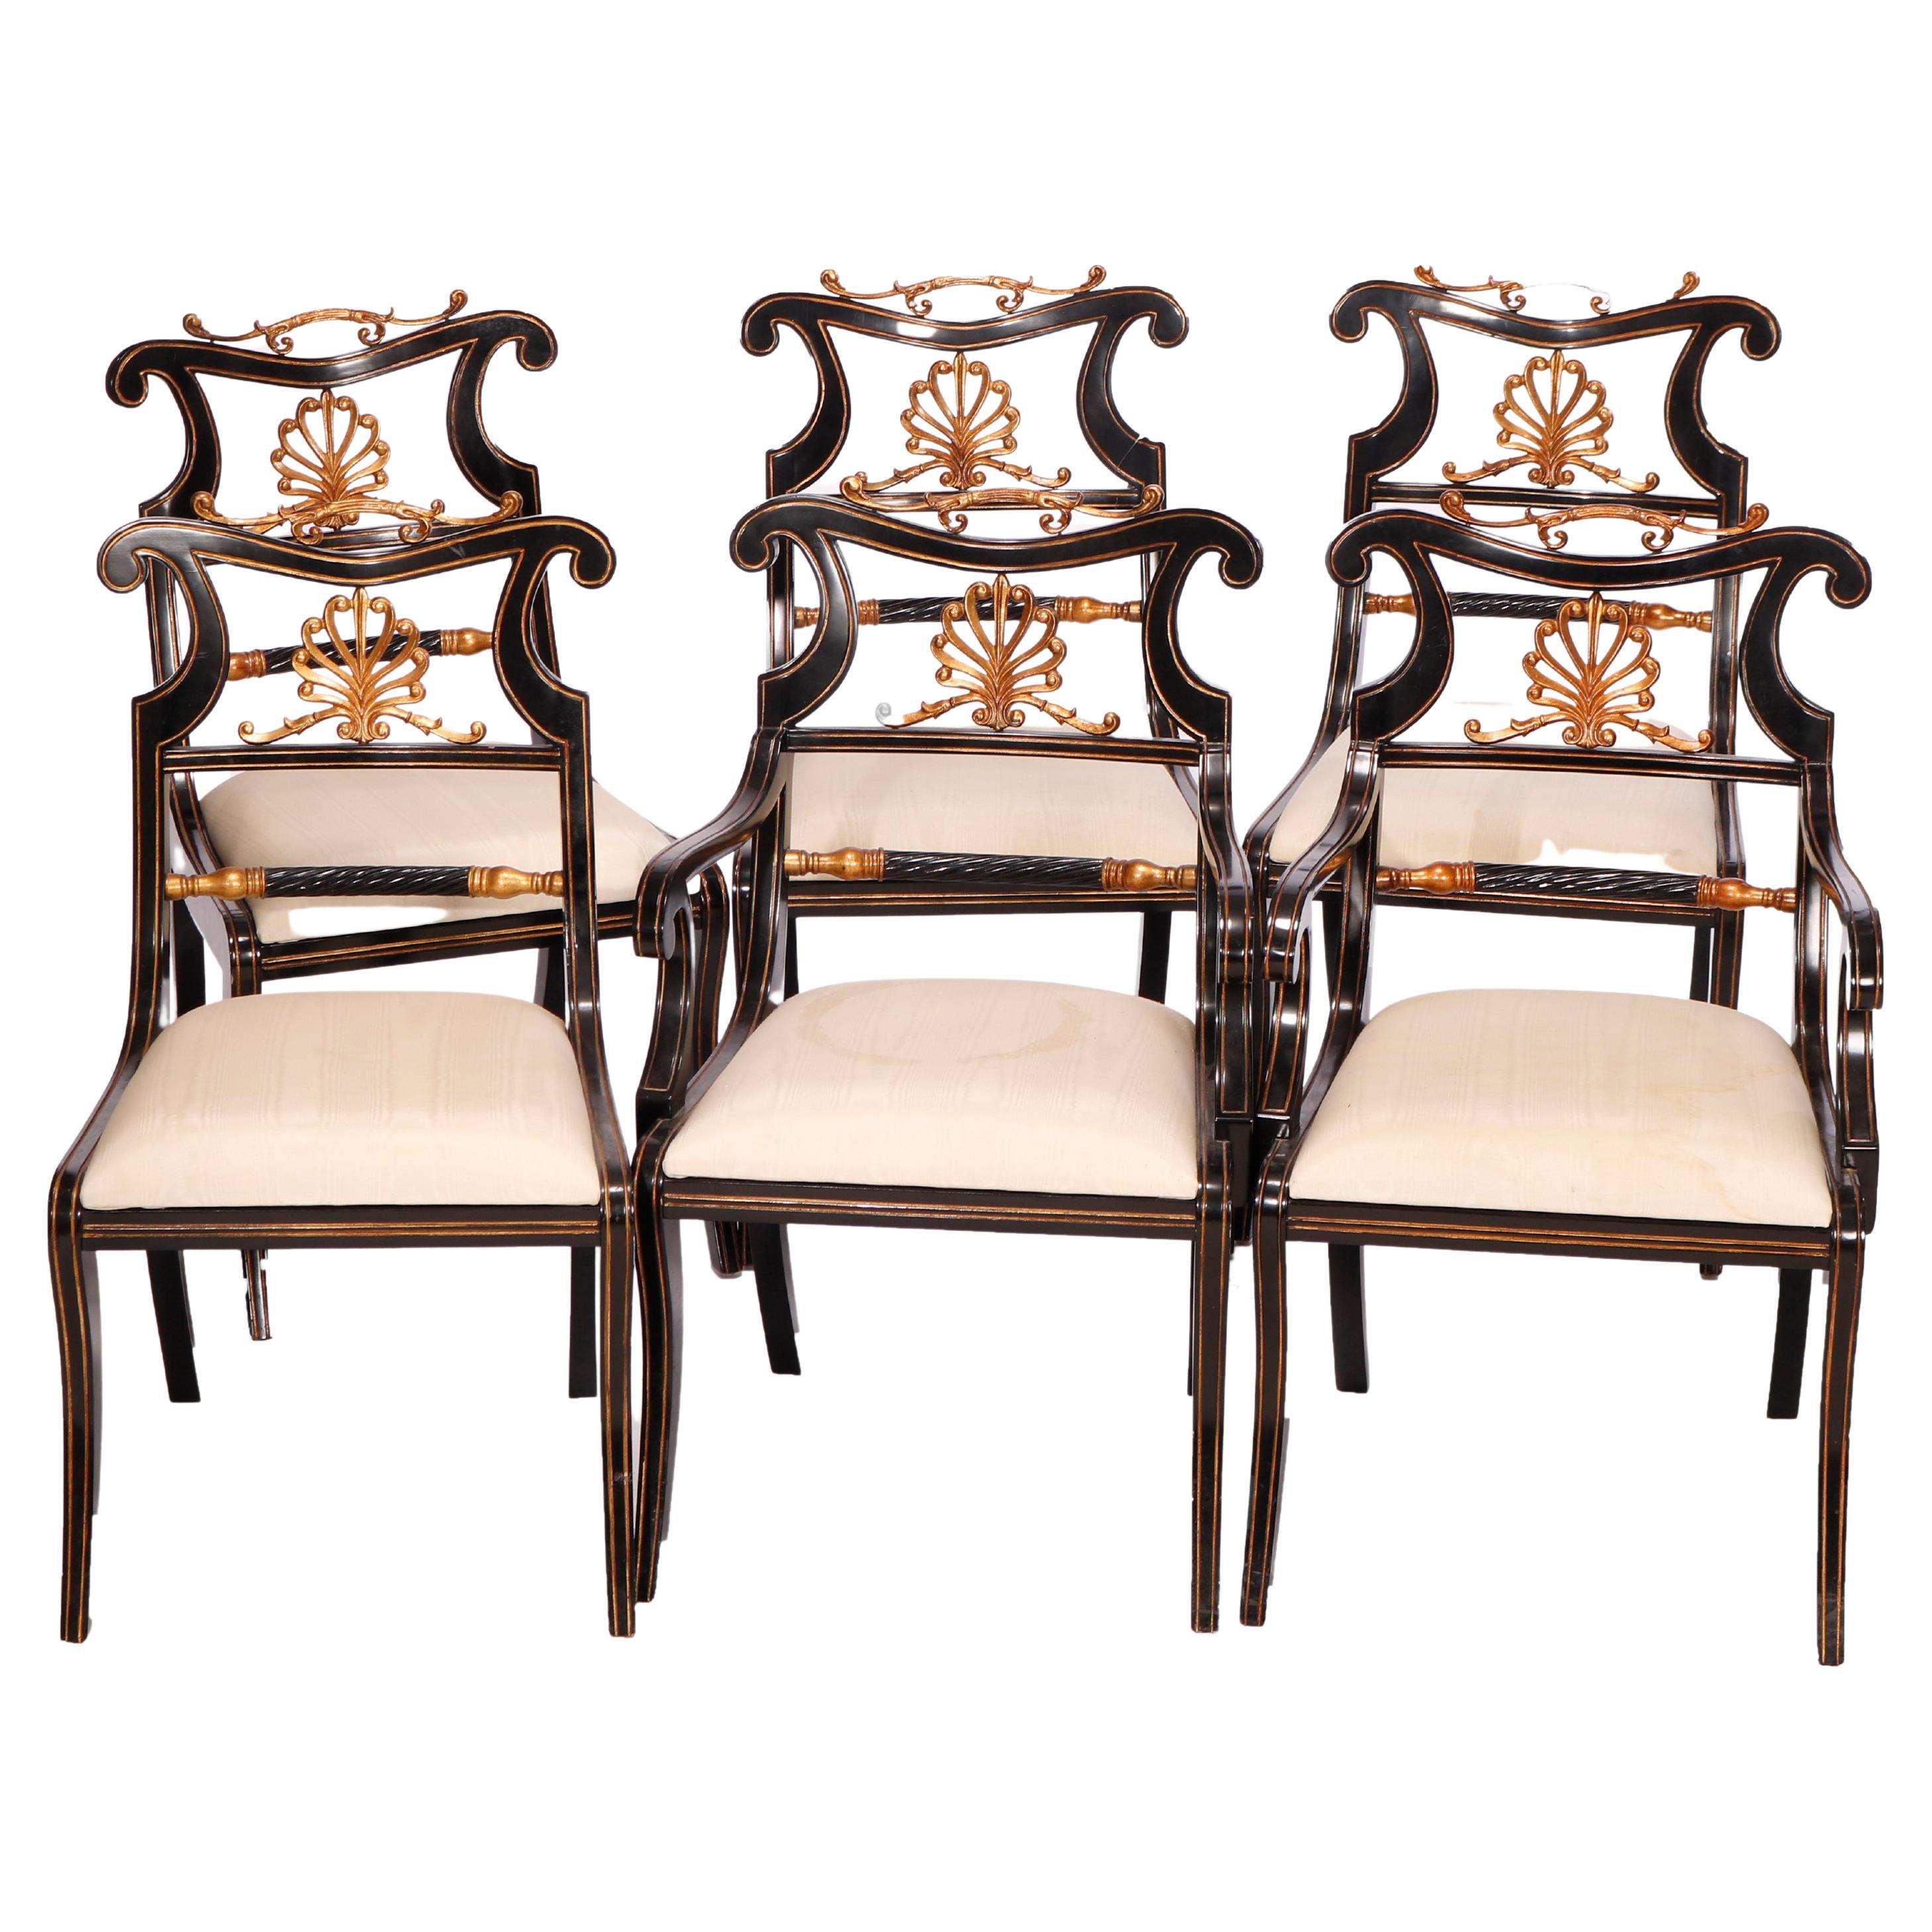 Six Maitland Smith French Empire Style Ebonized & Giltwood Dining Chairs 20th C